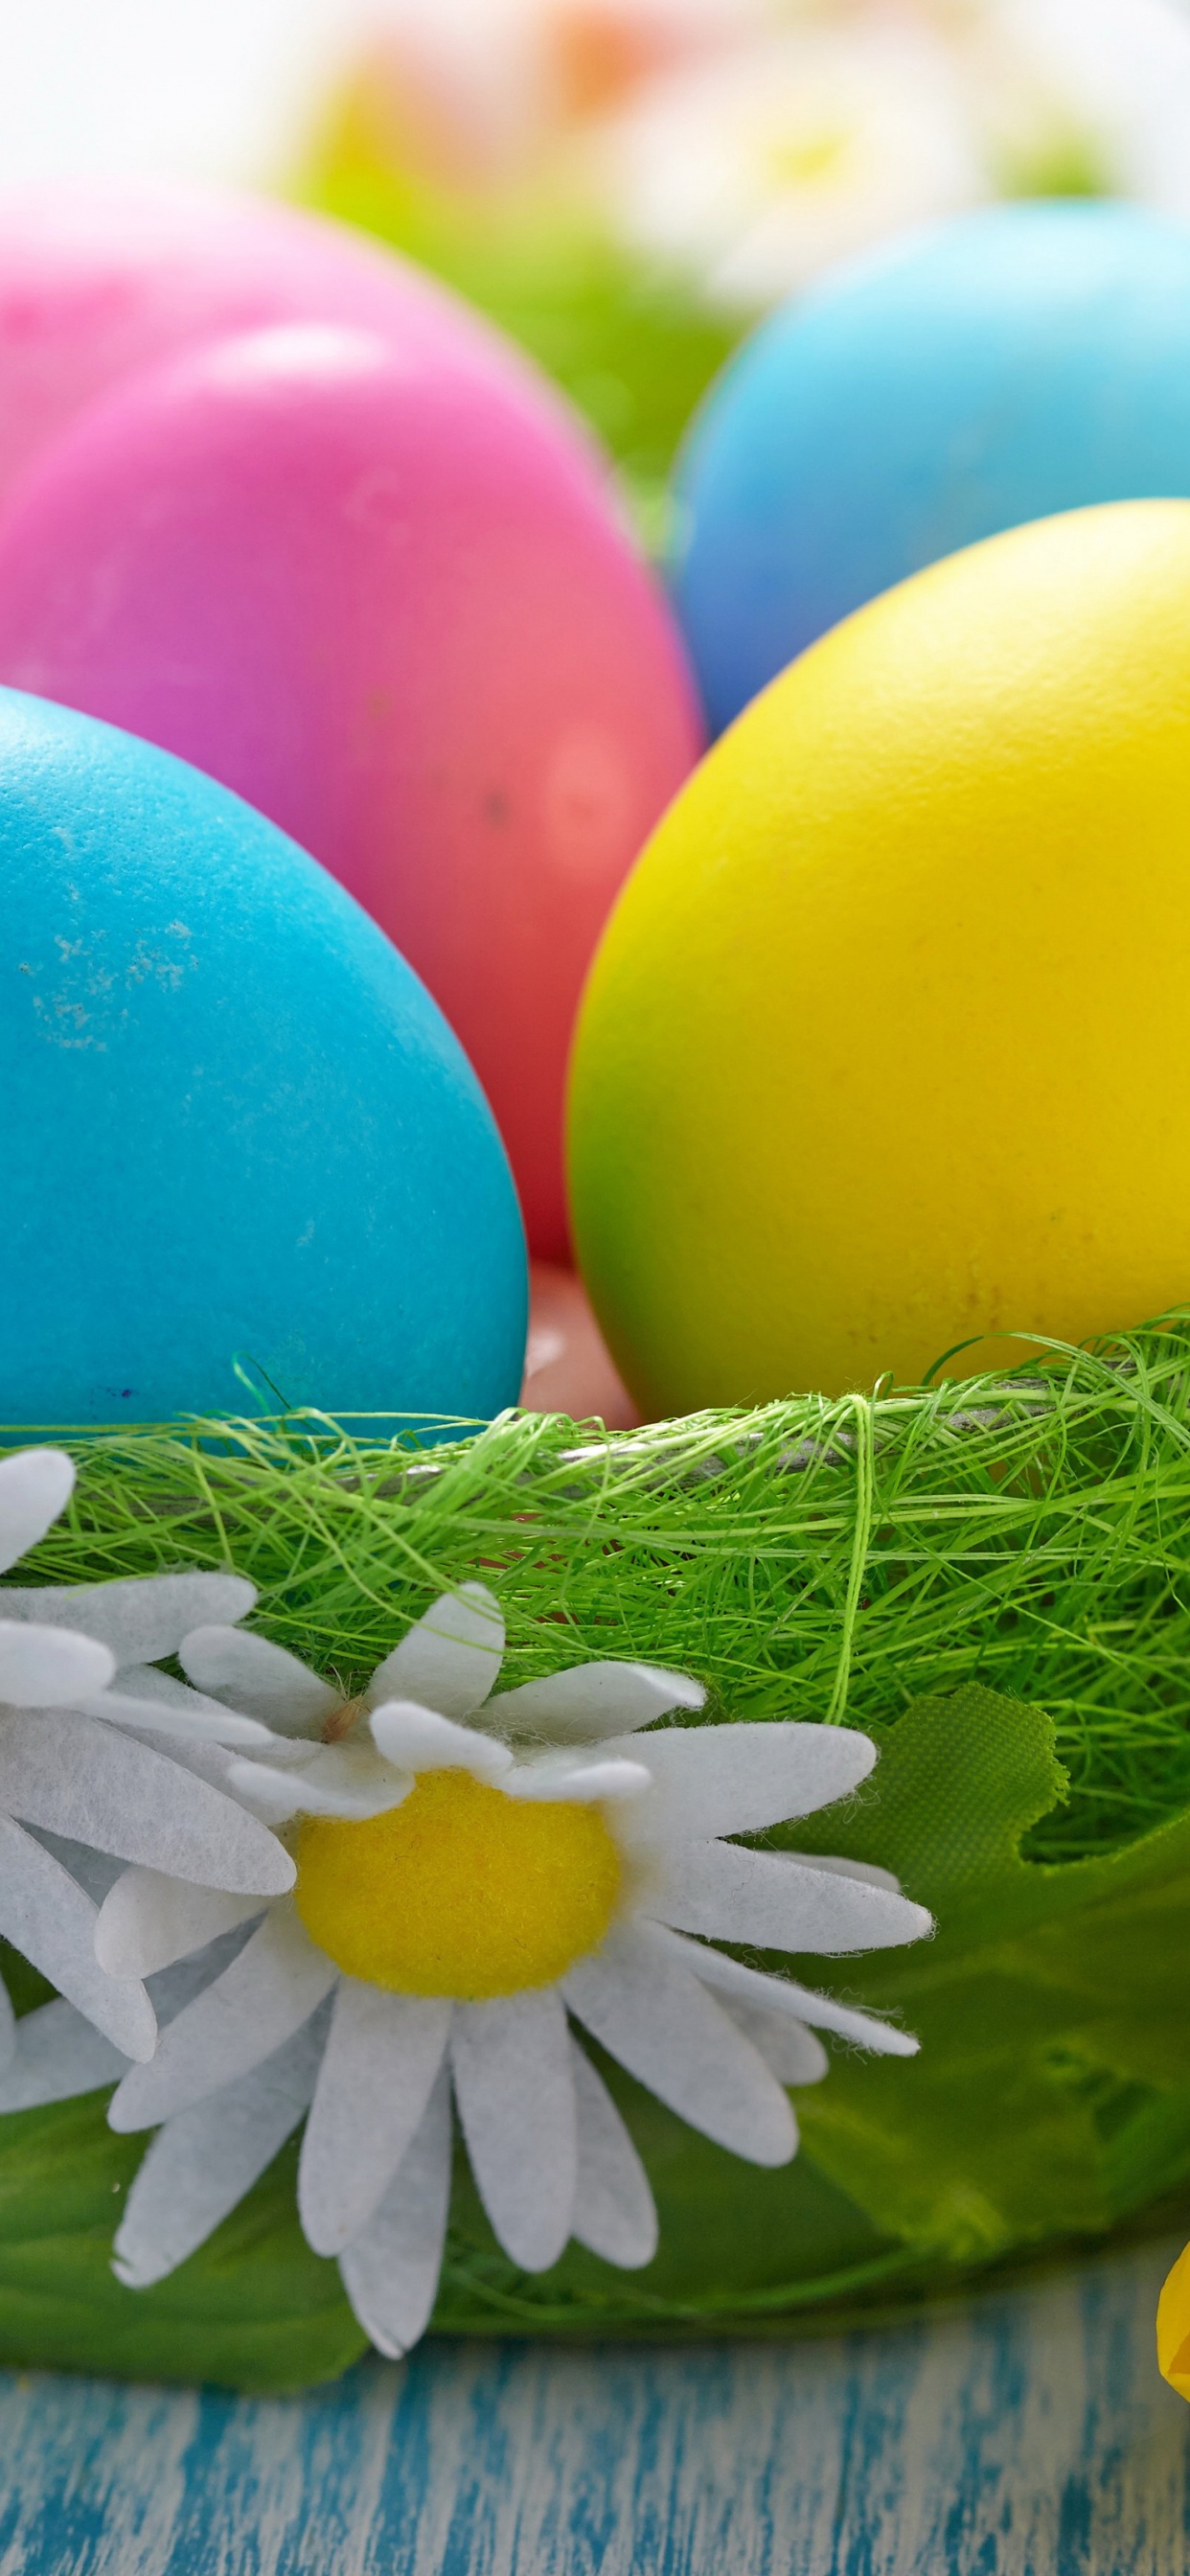 Easter Eggs In A Green Basket